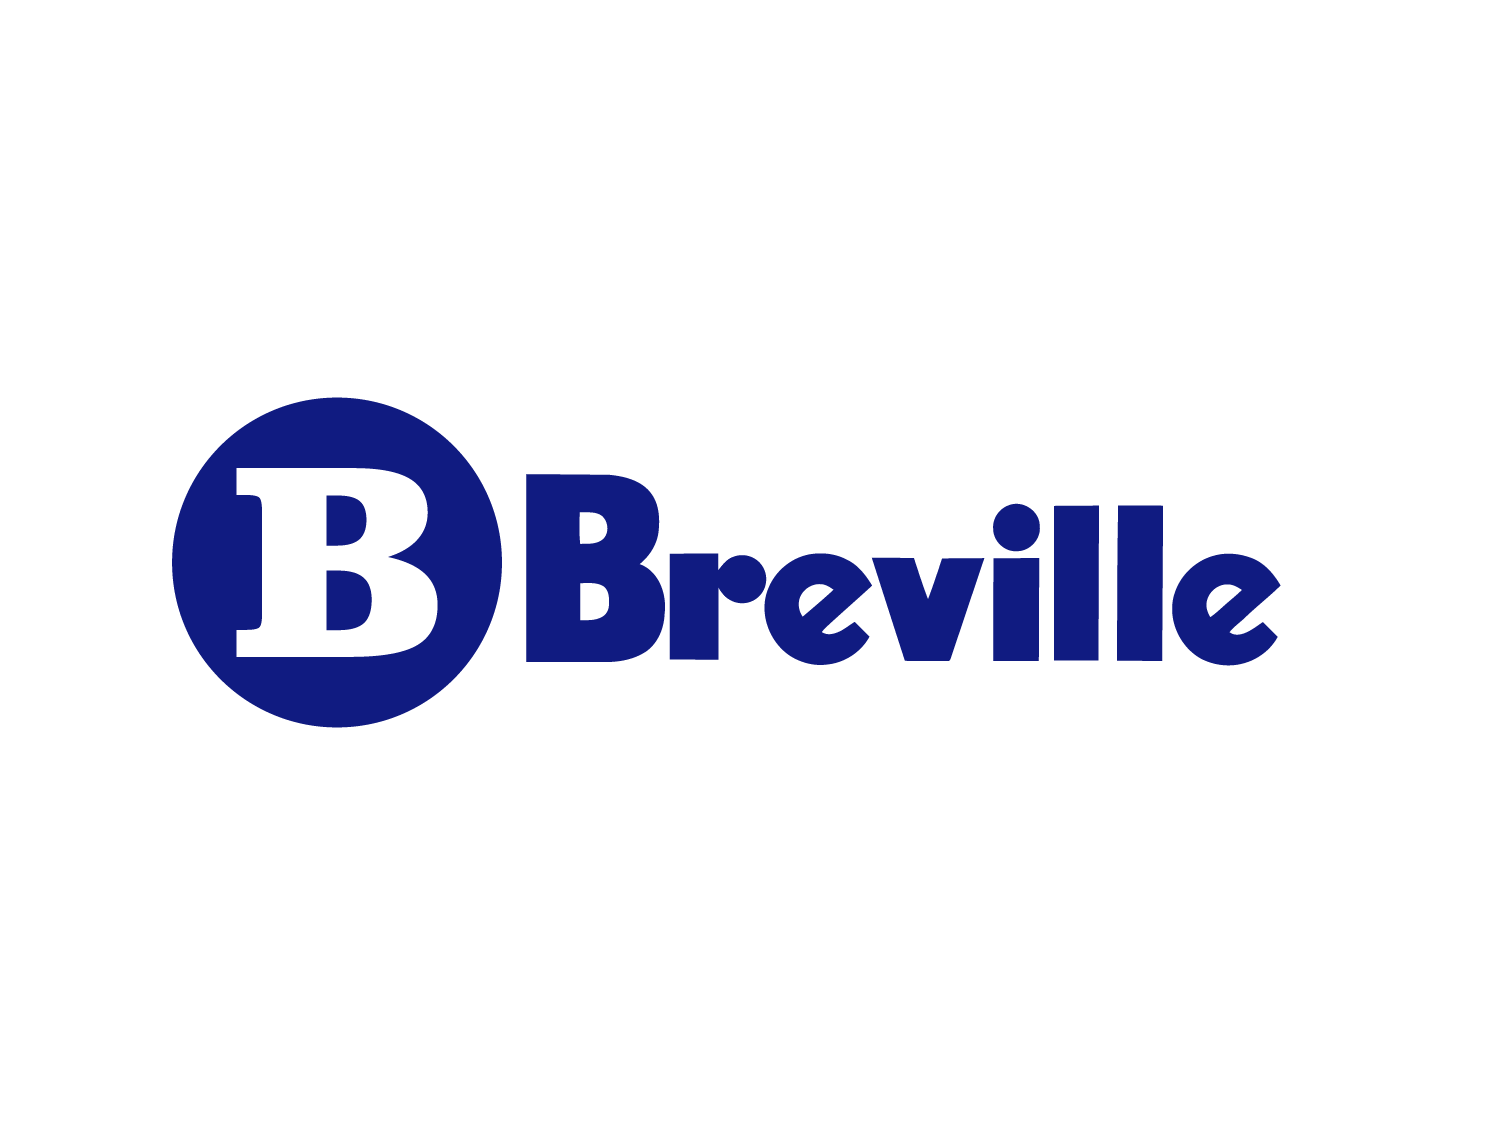 Breville-1500×1125-before-and-after-old